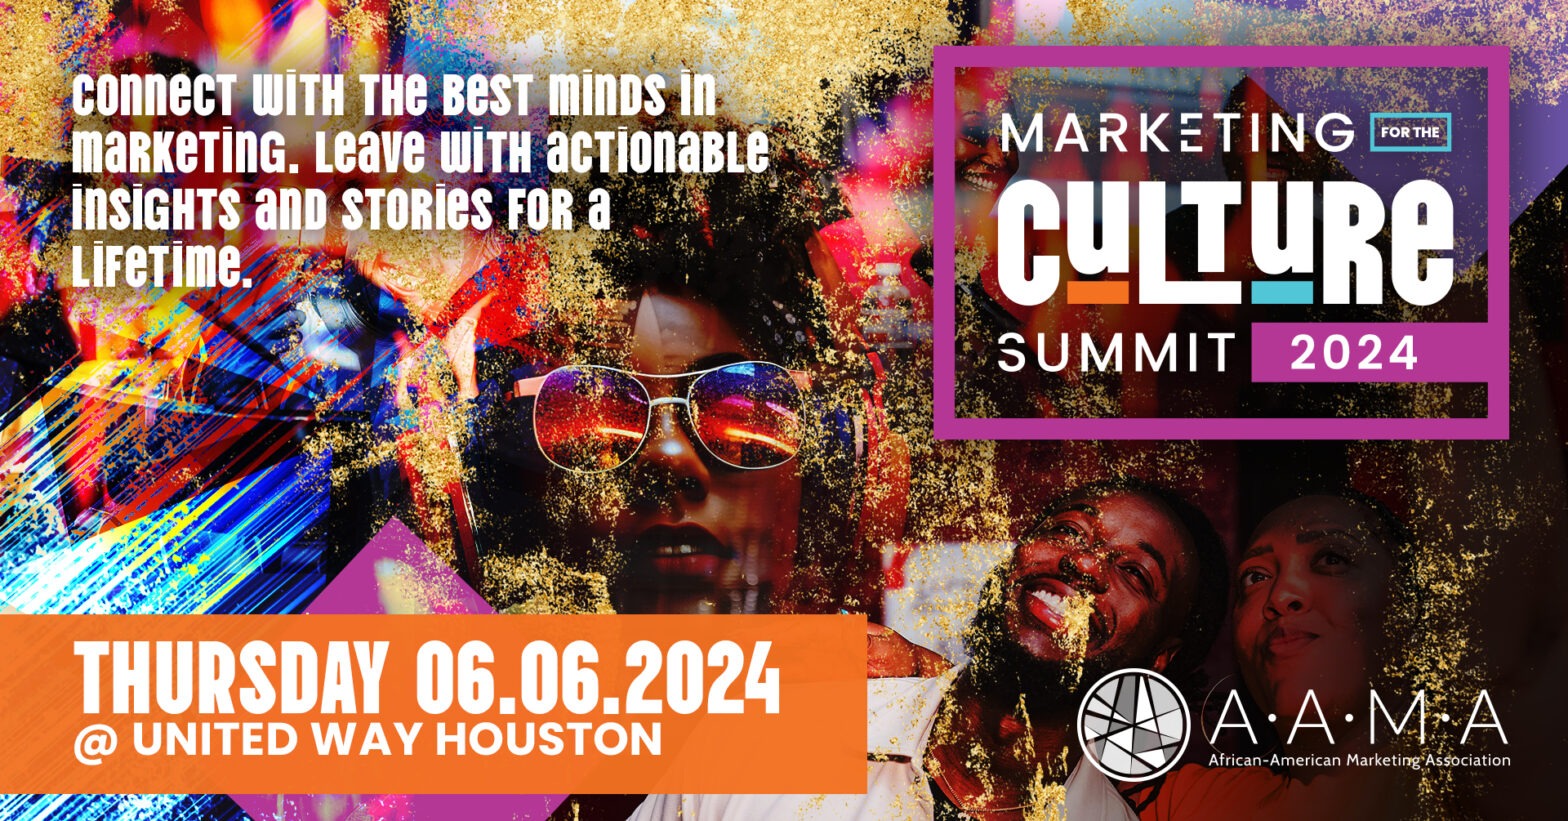 Marketing for the Culture Summit 2024